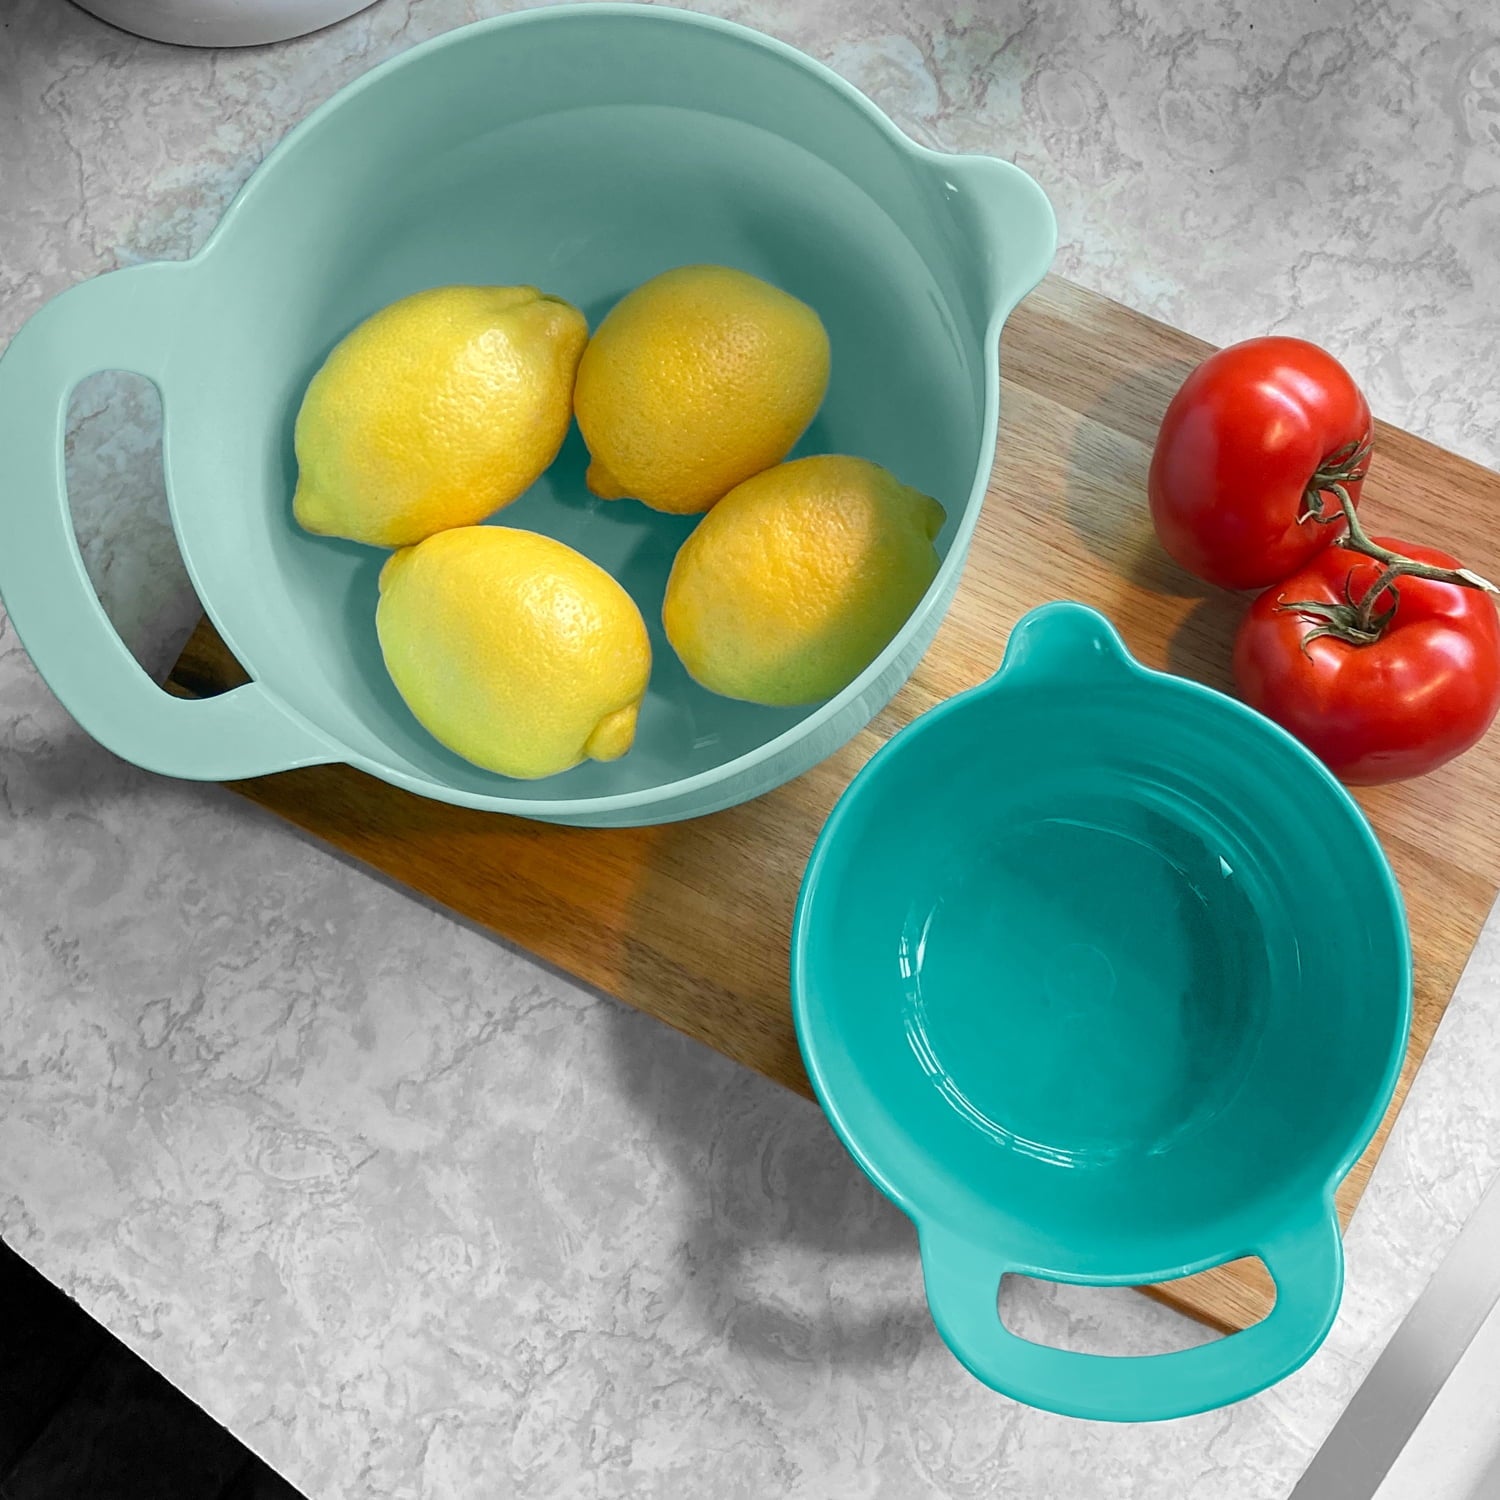 Edge Mixing Bowls 4 Piece Plastic Non-Skid Nesting Bowls with Spouts and Handles, Teal